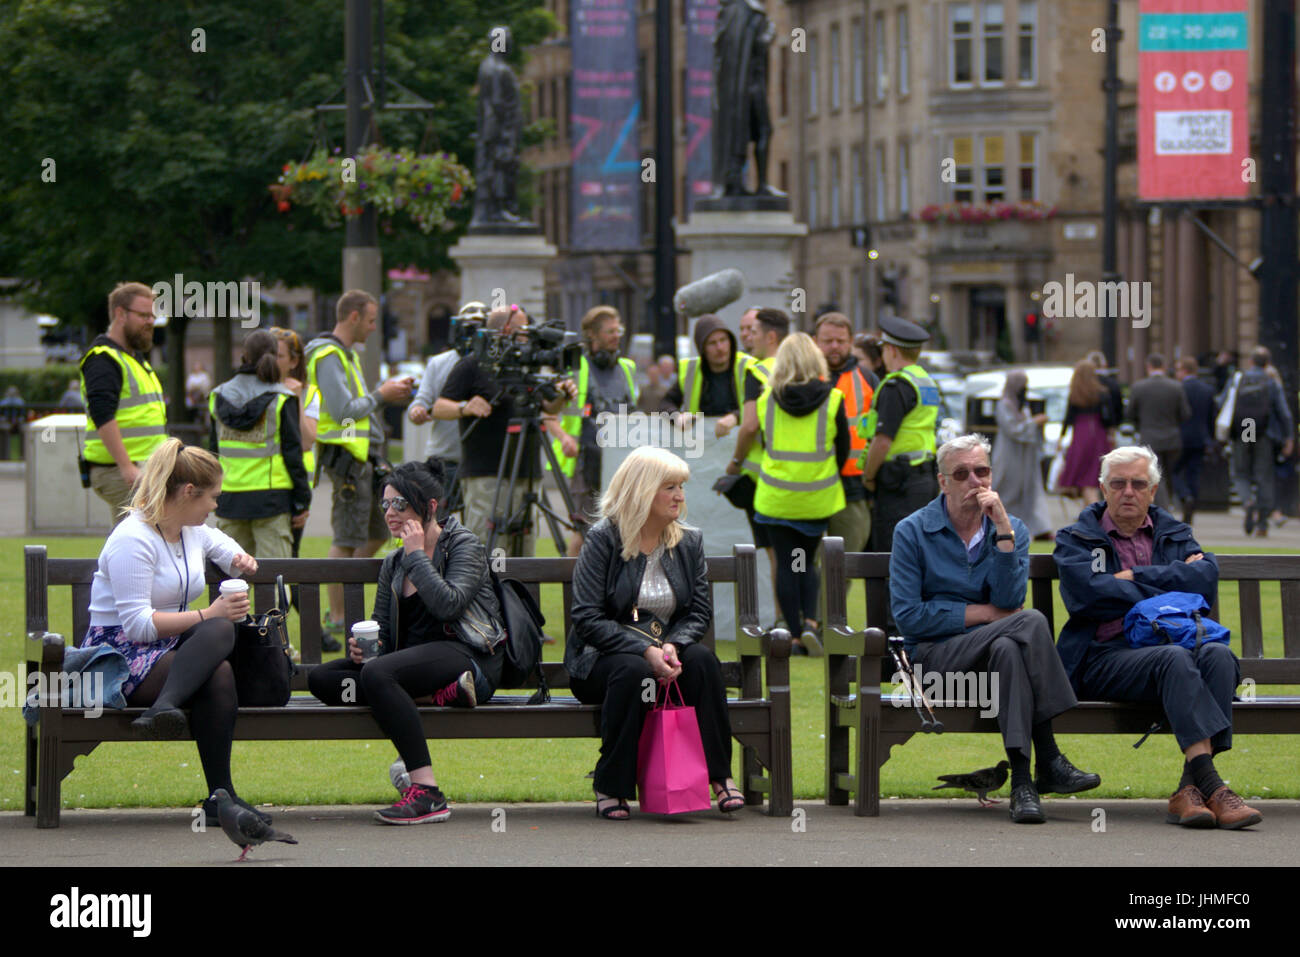 Glasgow, Scotland, UK. 14th July. Filming was nonchalantly ignored today by locals now getting used to media and film crews in the city as people passed their lunchtime with the latest series of  the BBC Scotland spoof police comedy “Scot squad” was being shot in the city's George Square, Credit: gerard ferry/Alamy Live News Stock Photo